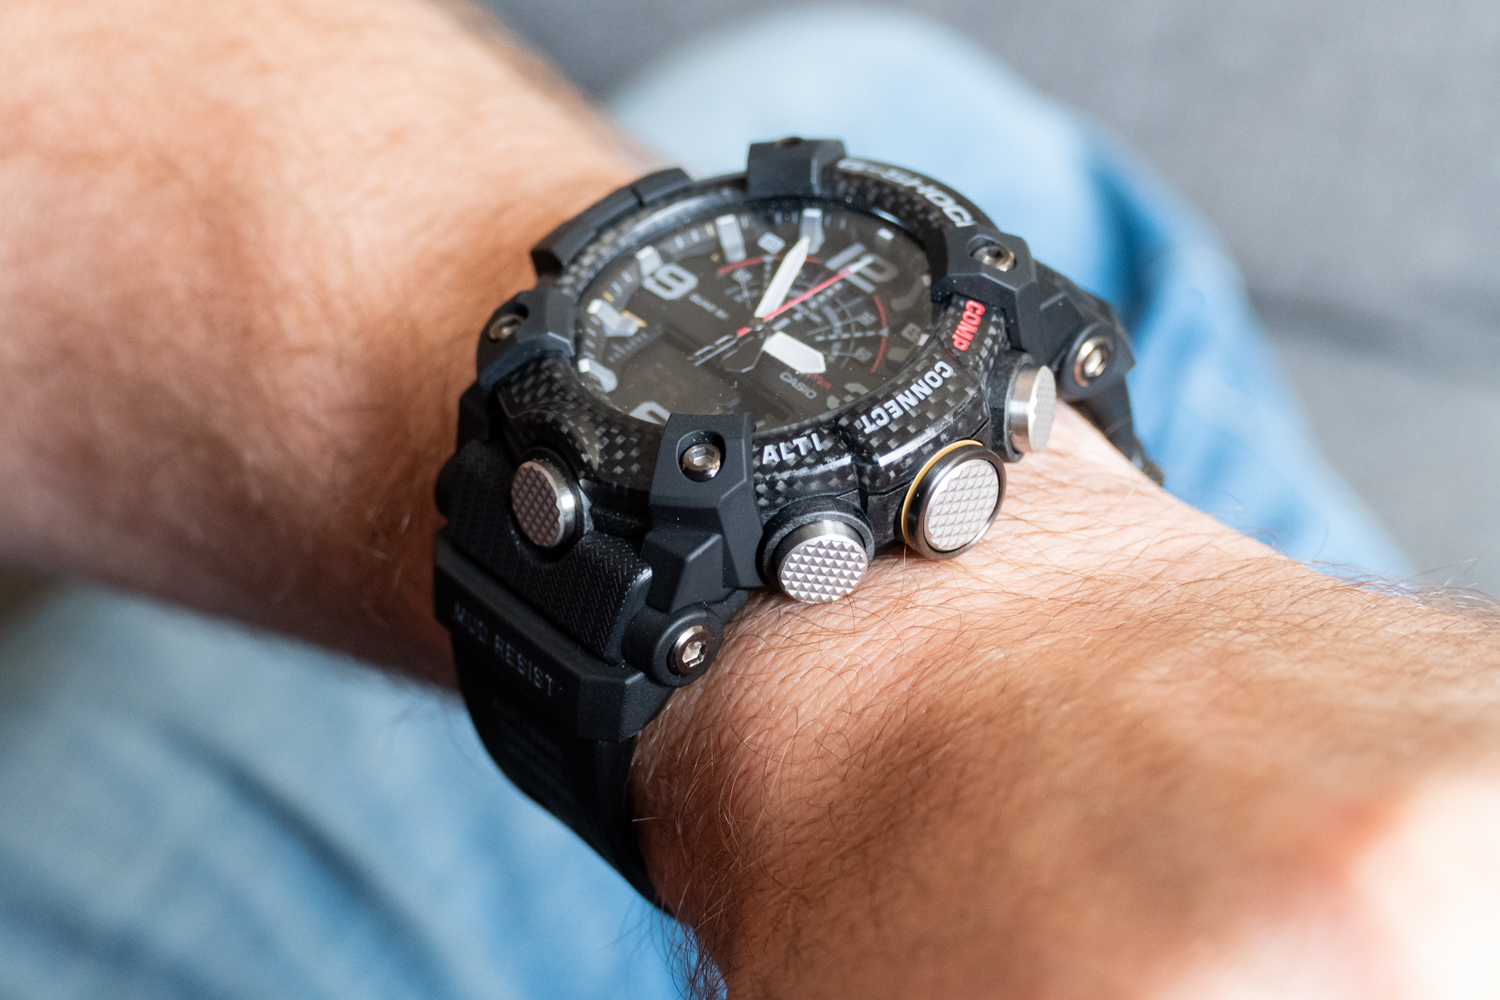 The Carbon-Cased G-Shock Mudmaster Watch is Still as Extreme as